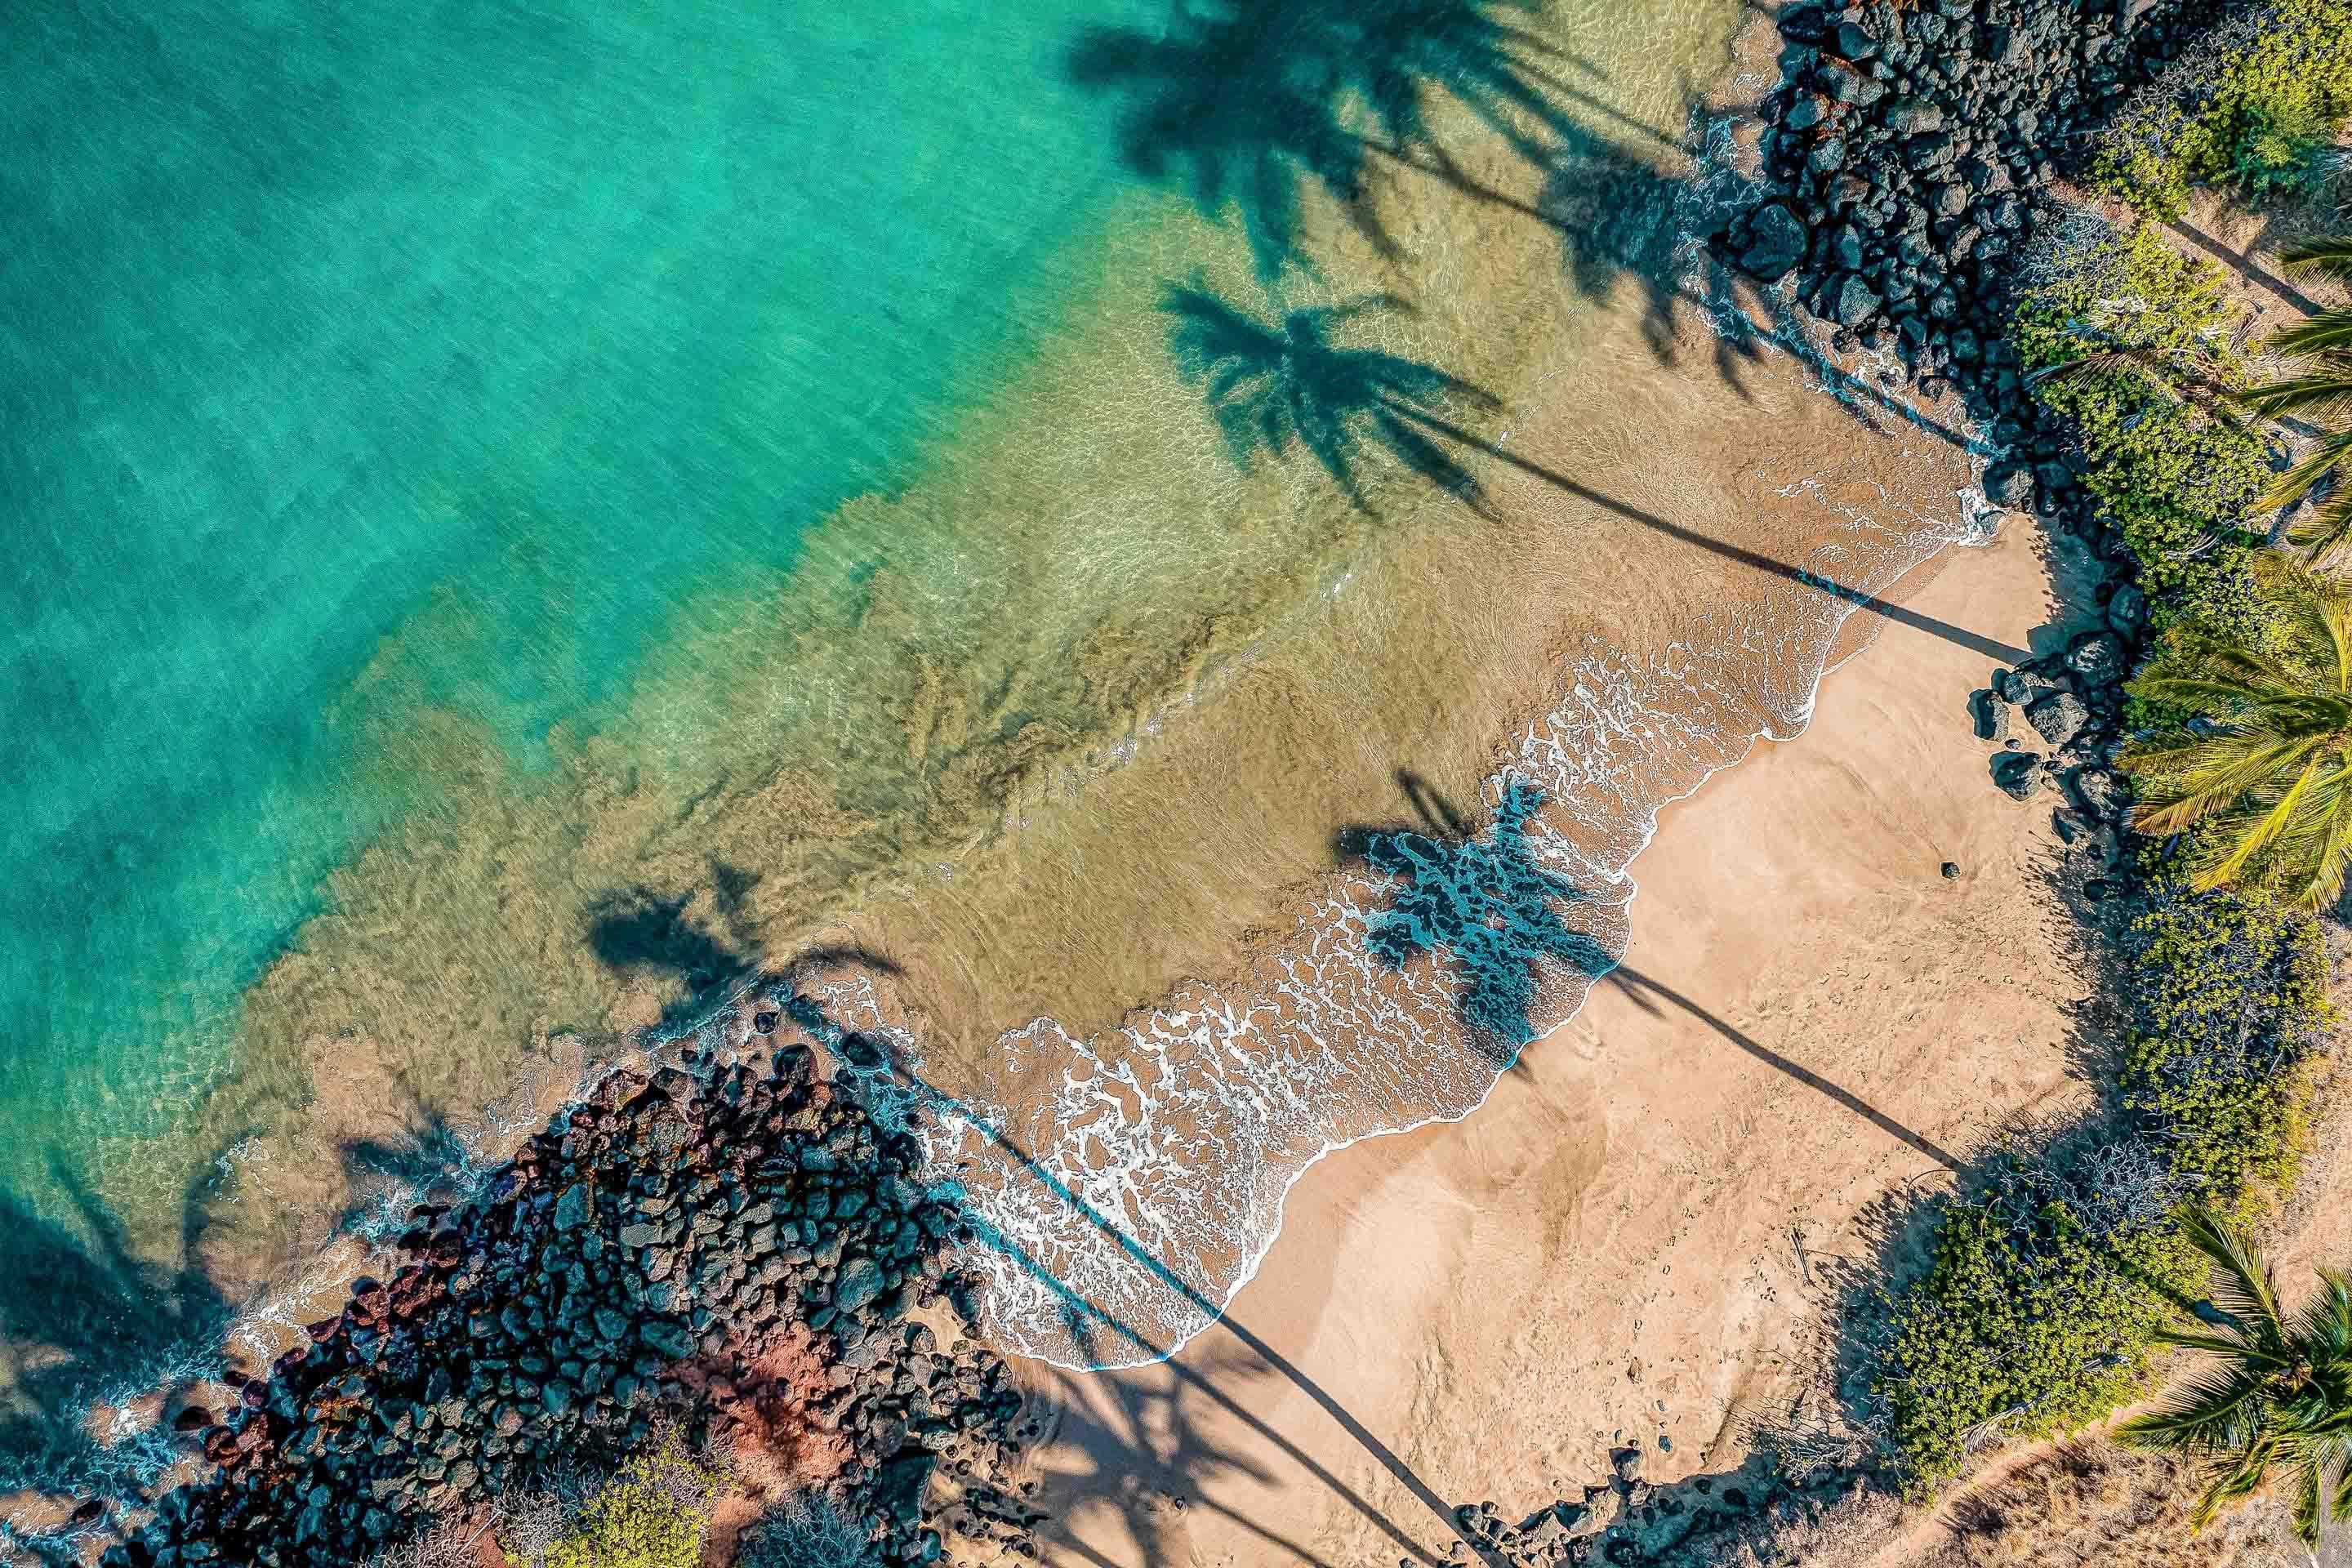 Another Day In Paradise - Living Moments Media - 3500-5500, 800-3500, aerial, beach, Best Moments, Best Sellers, Best Wall Artwork, blue, Coast, Cove, green, Hawaii, horizontal, Island, kihei, maui, Maui Hawaii Fine Art Photography, Maui Hawaii Wall Art, ocean, open-edition, over-5500, Palm Trees, palm-tree, rocks, sand, size-16x-24, size-24-x-36, size-40-x-60, spinimages=1, teal, trail, Trees, Water, waves, White, yellow